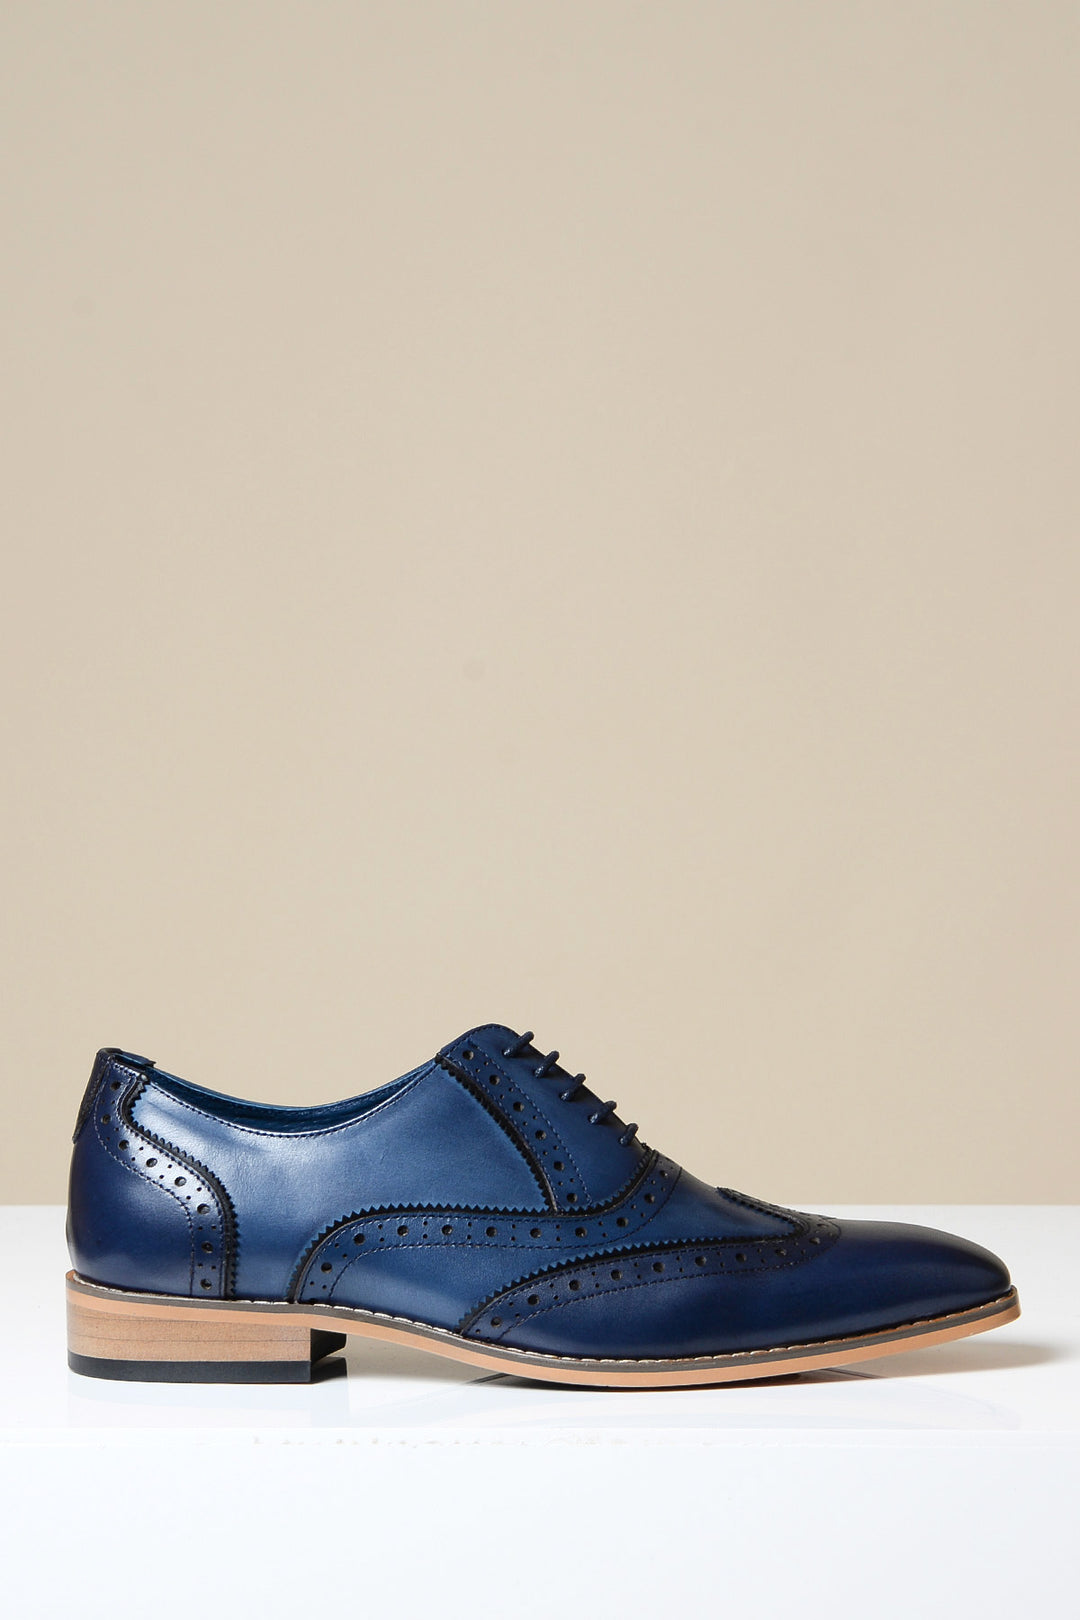 MARCO - Navy Blue Leather Oxford Wingtip Shoe